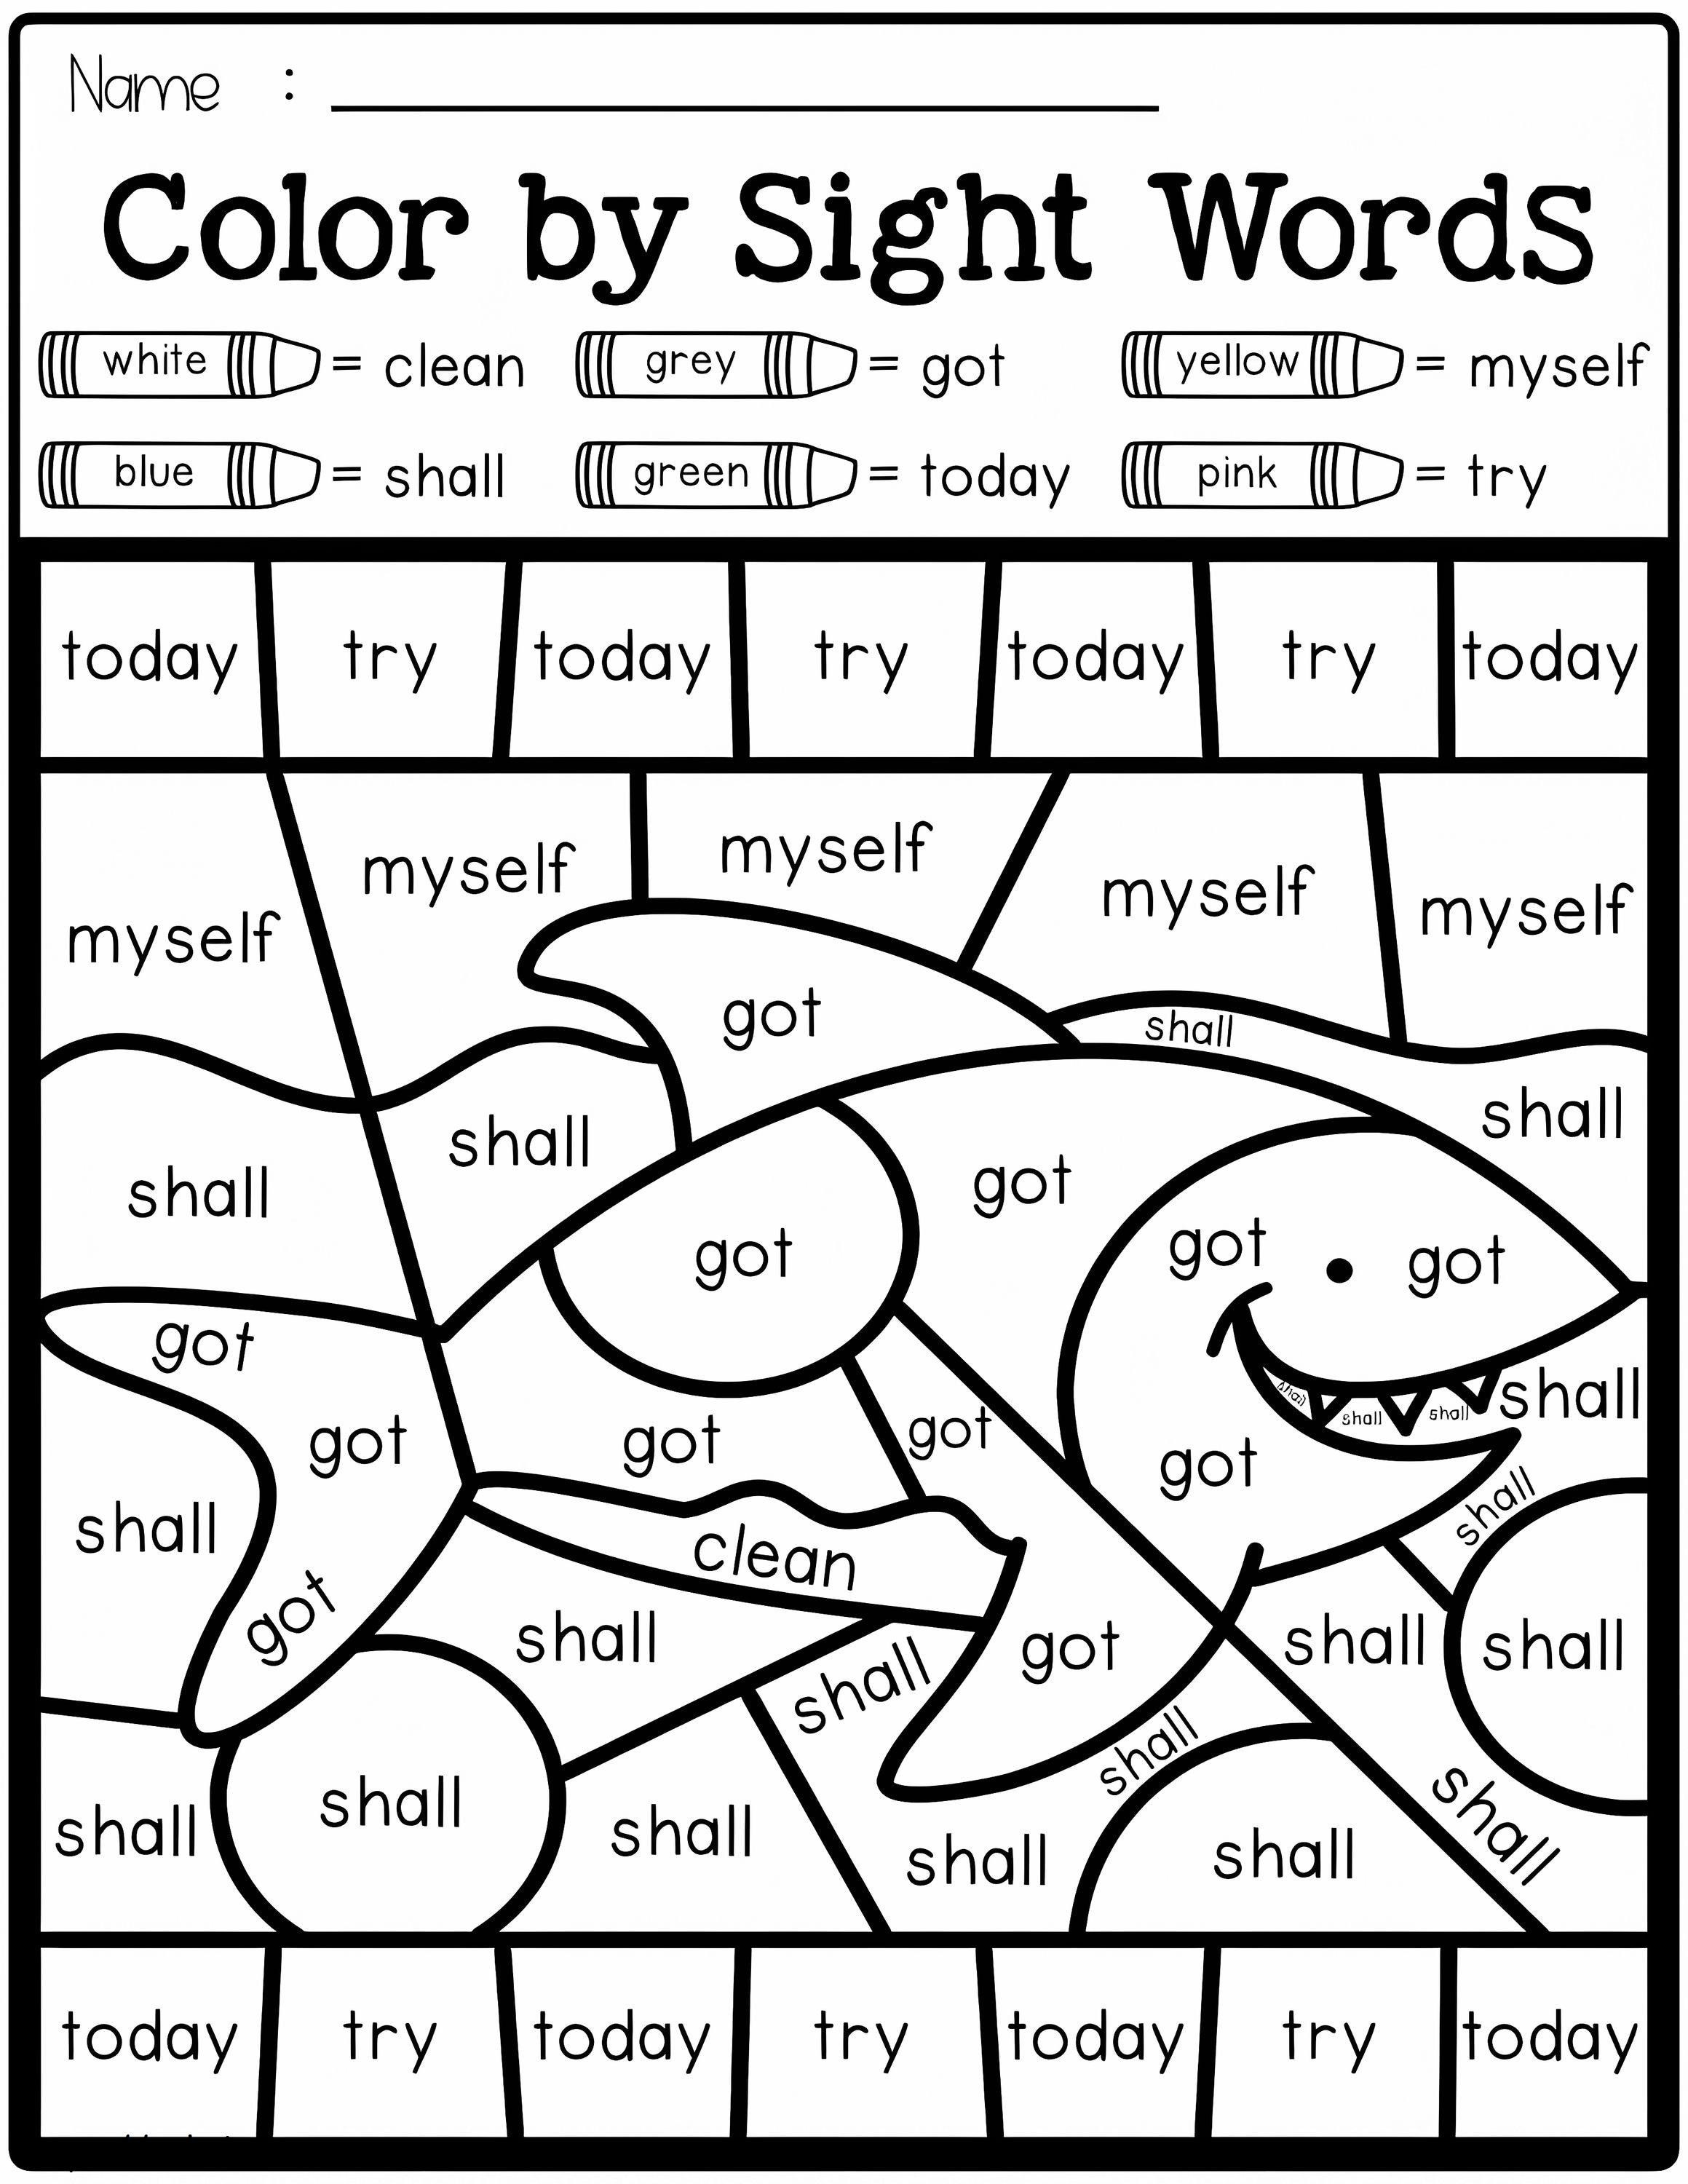 Shark sight words coloring page